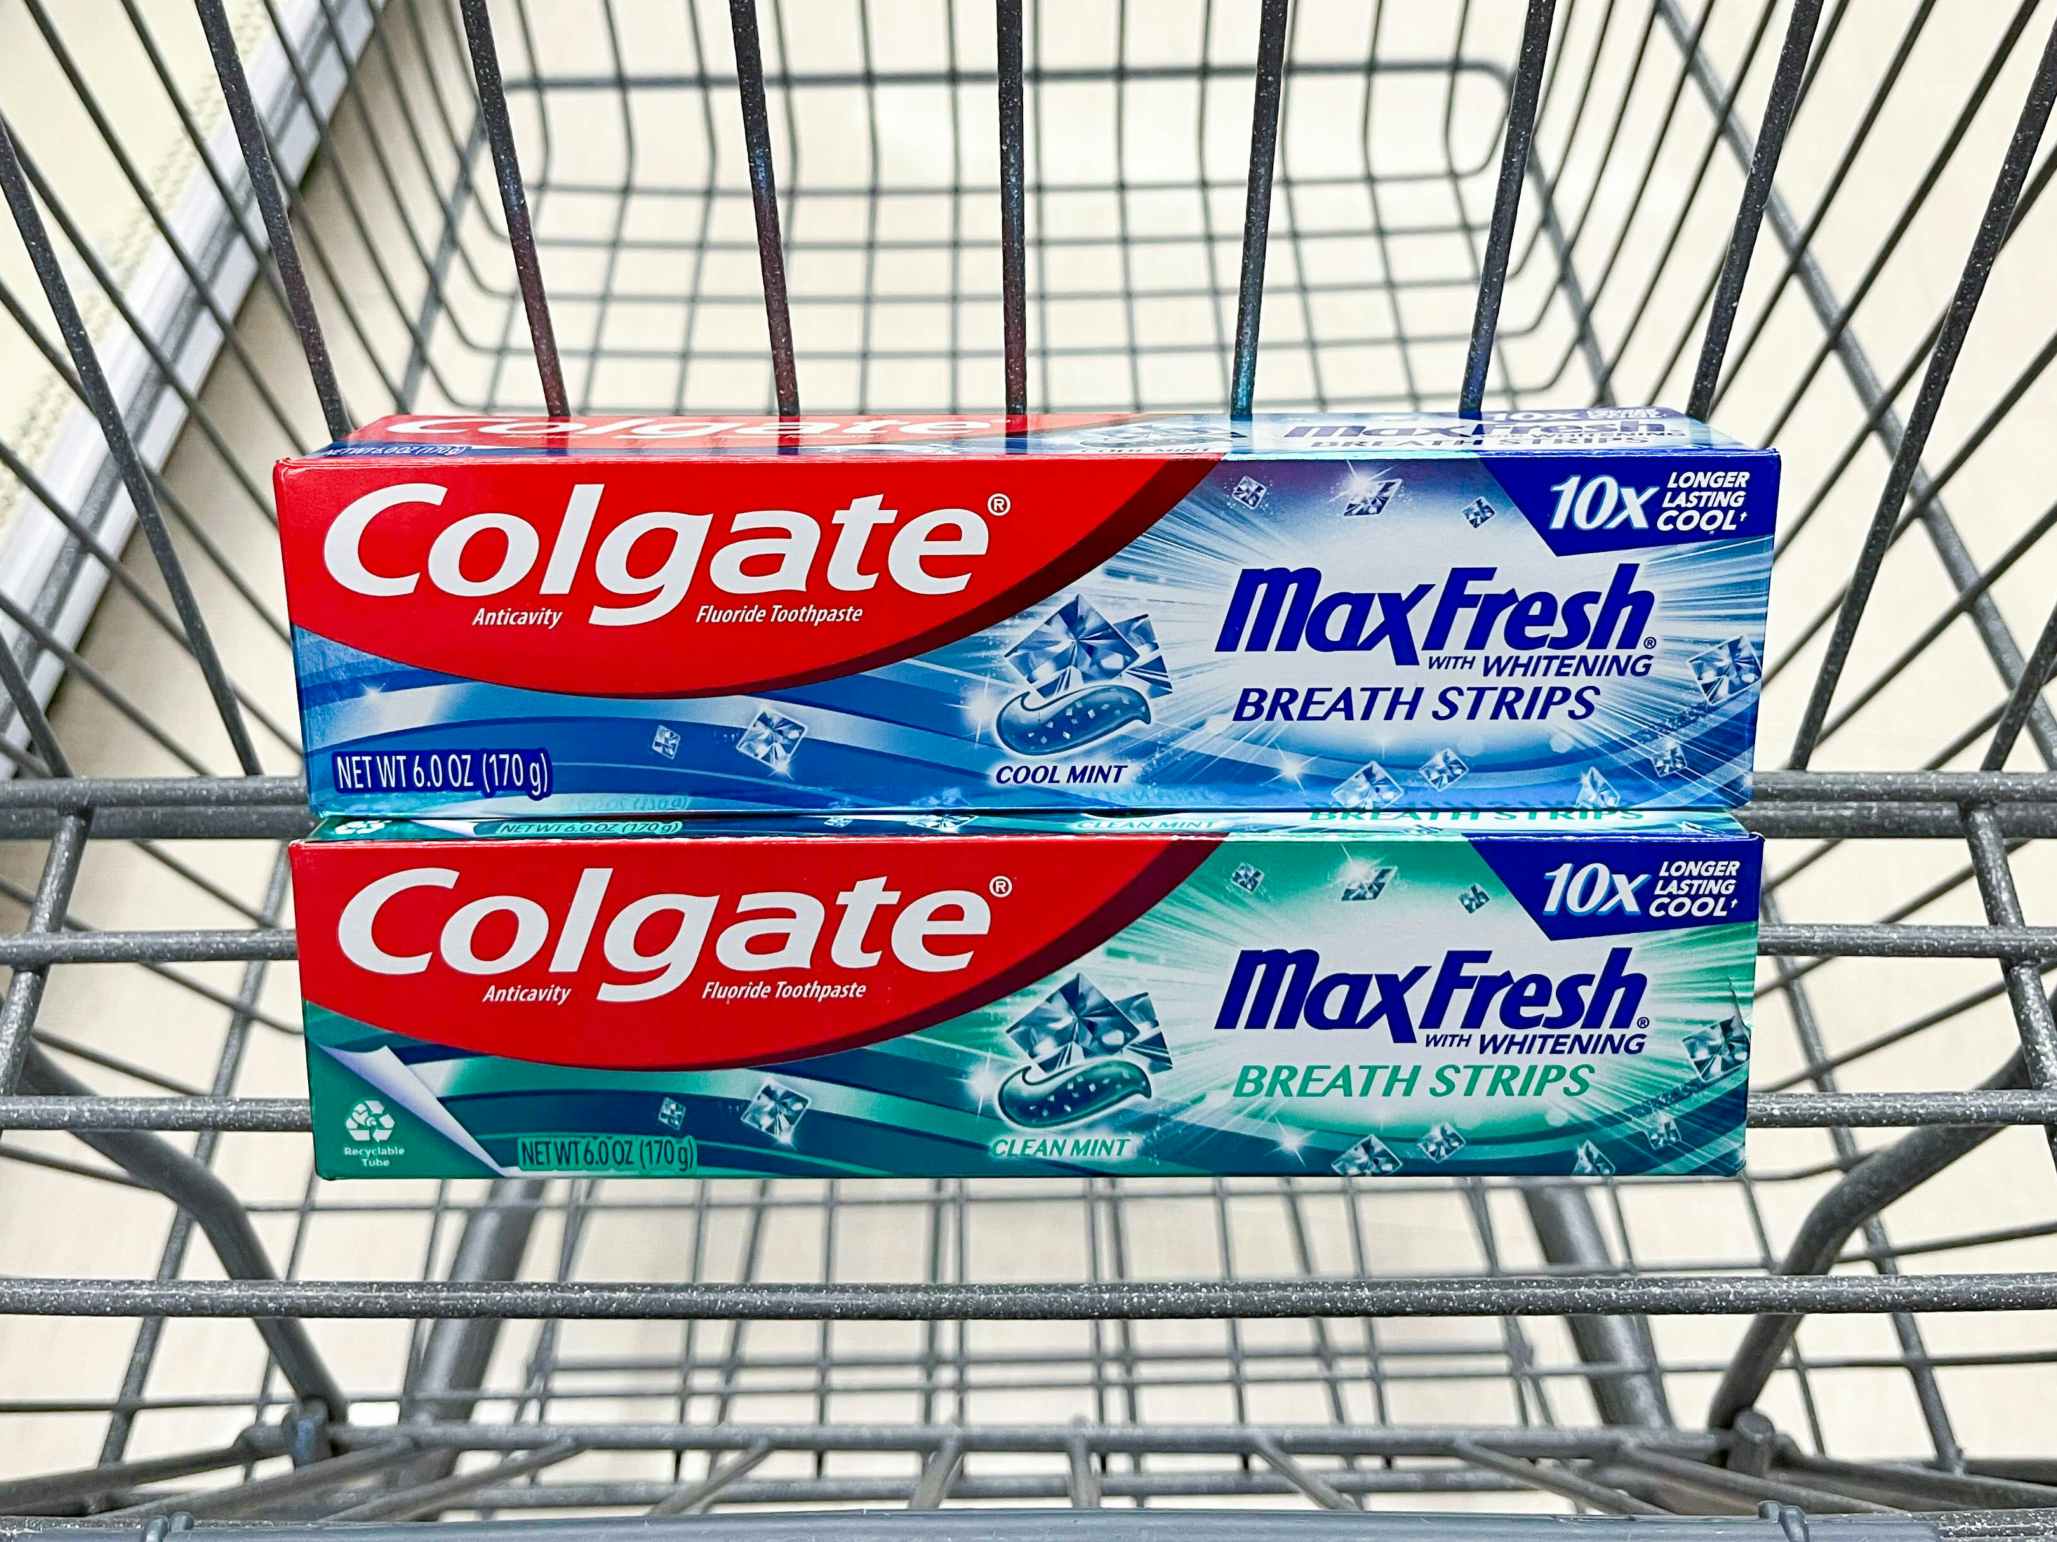 Two boxes of Colgate MaxFresh toothpaste stacked in a Walgreens shopping cart basket.